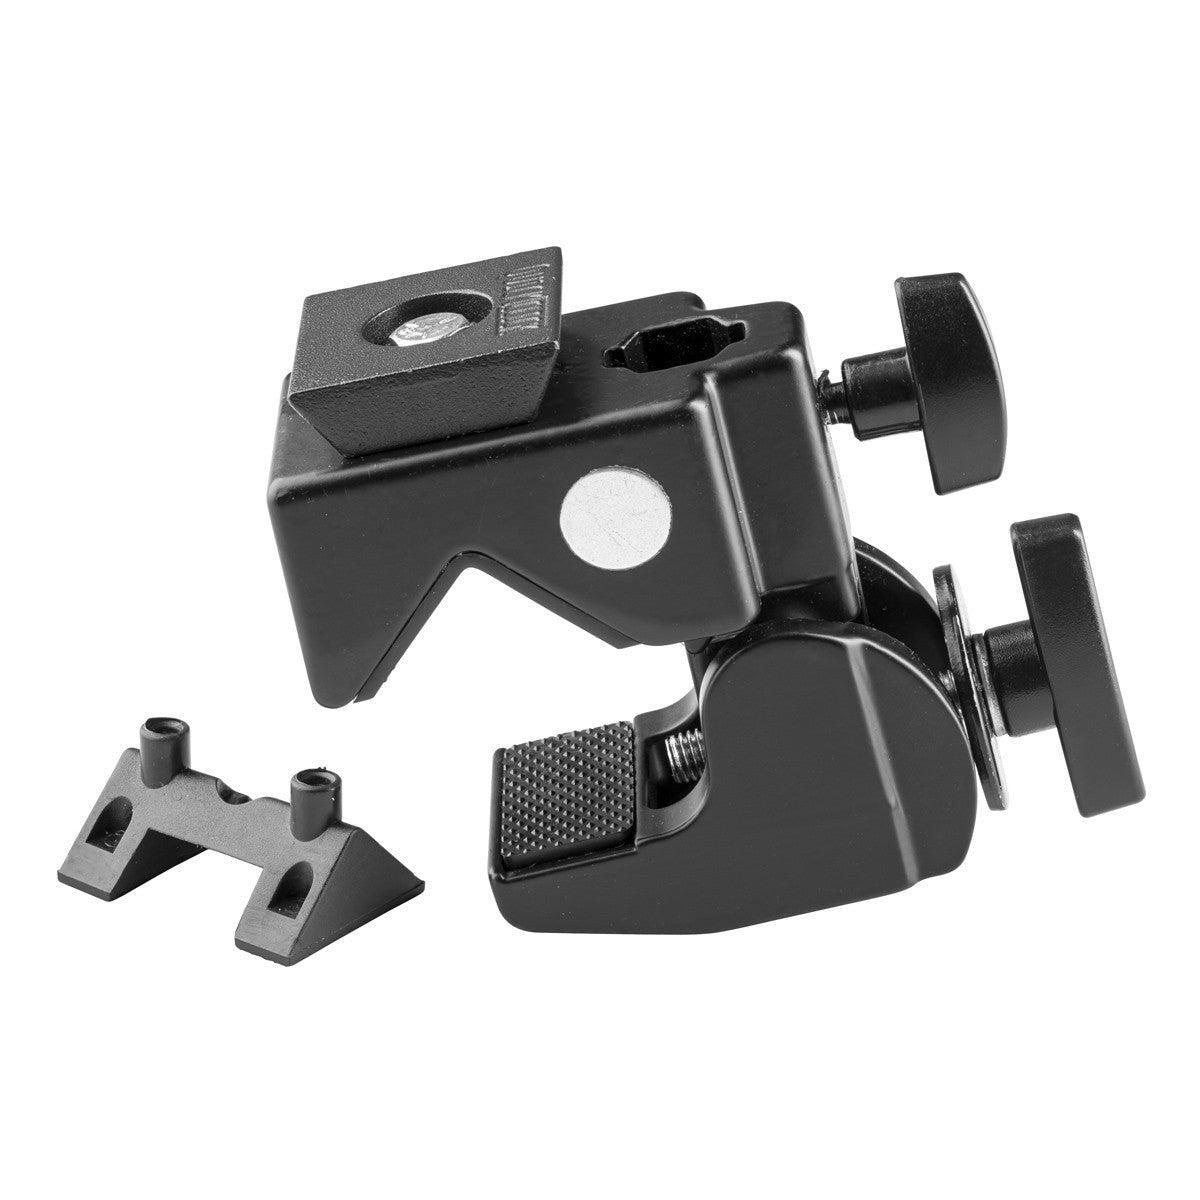 Mogo Adjustable Clamp with QuickClick